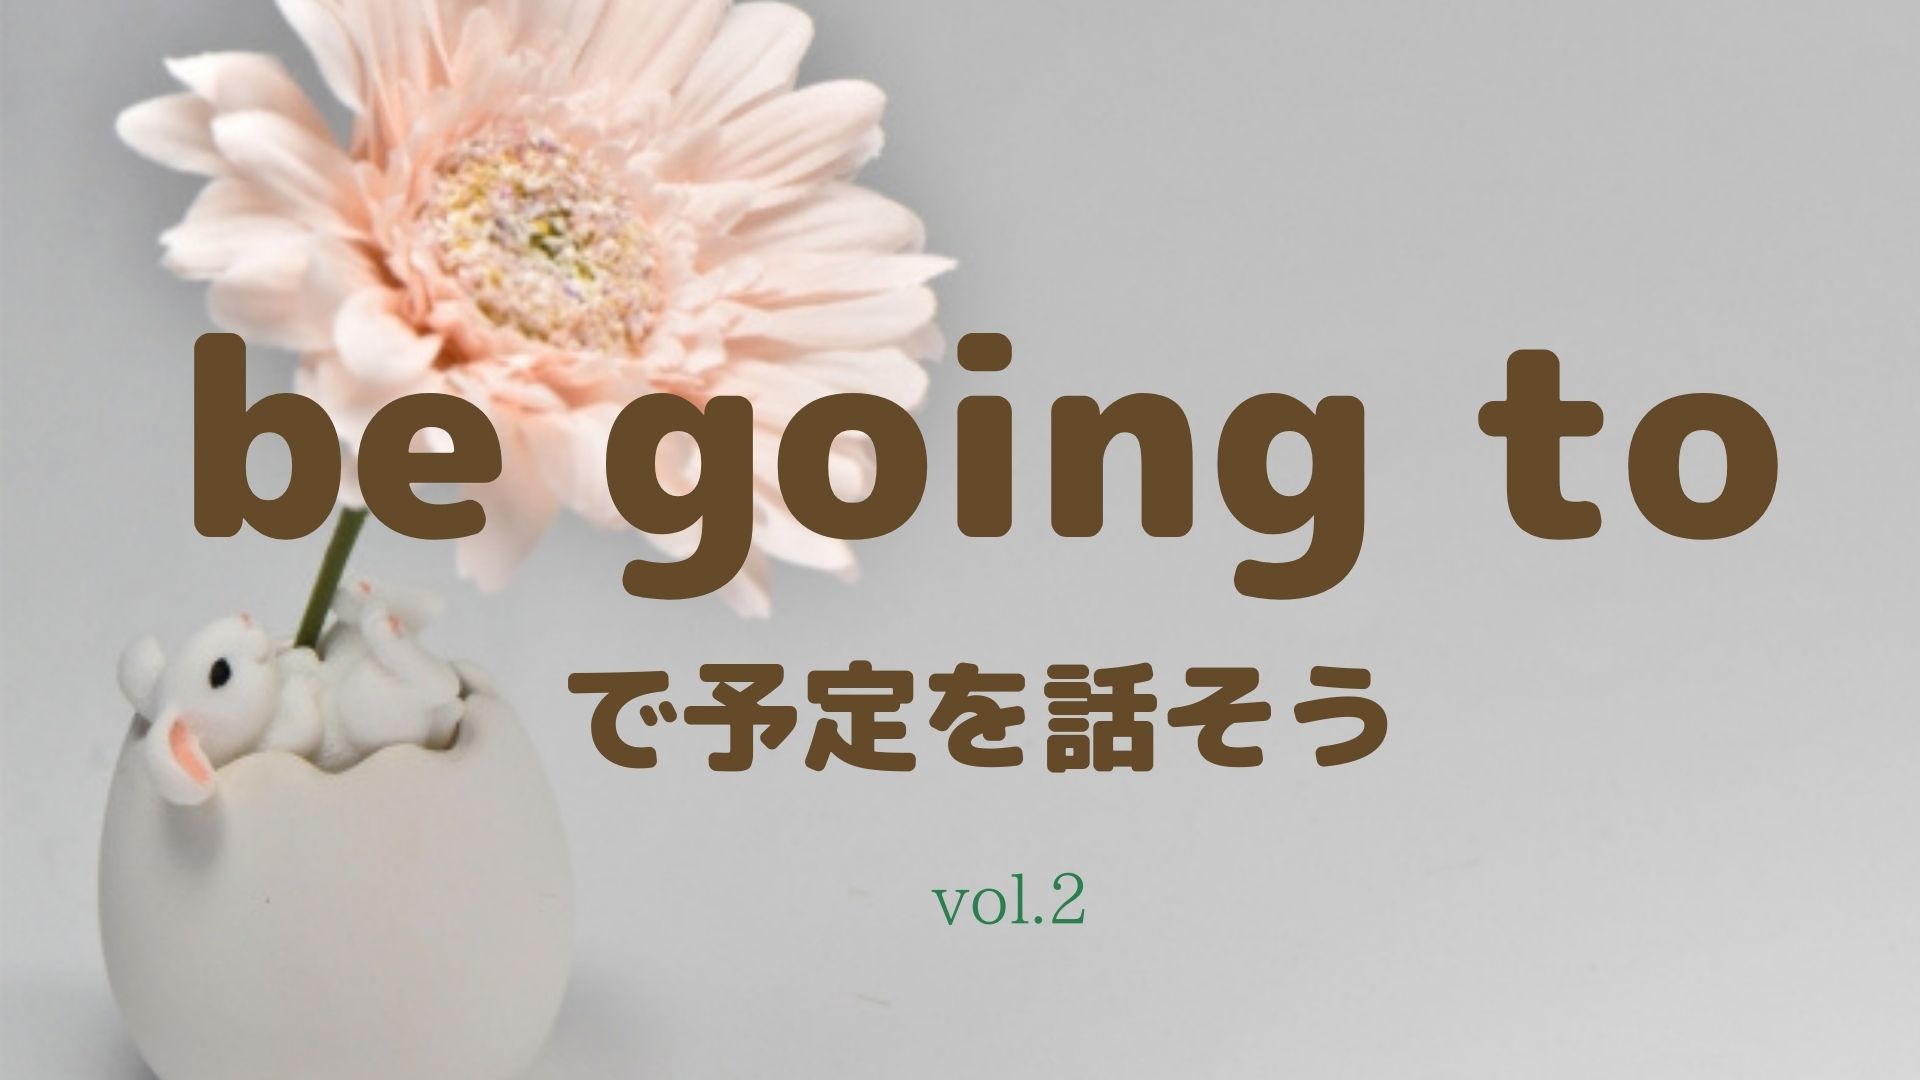 be going to 予定を話そう